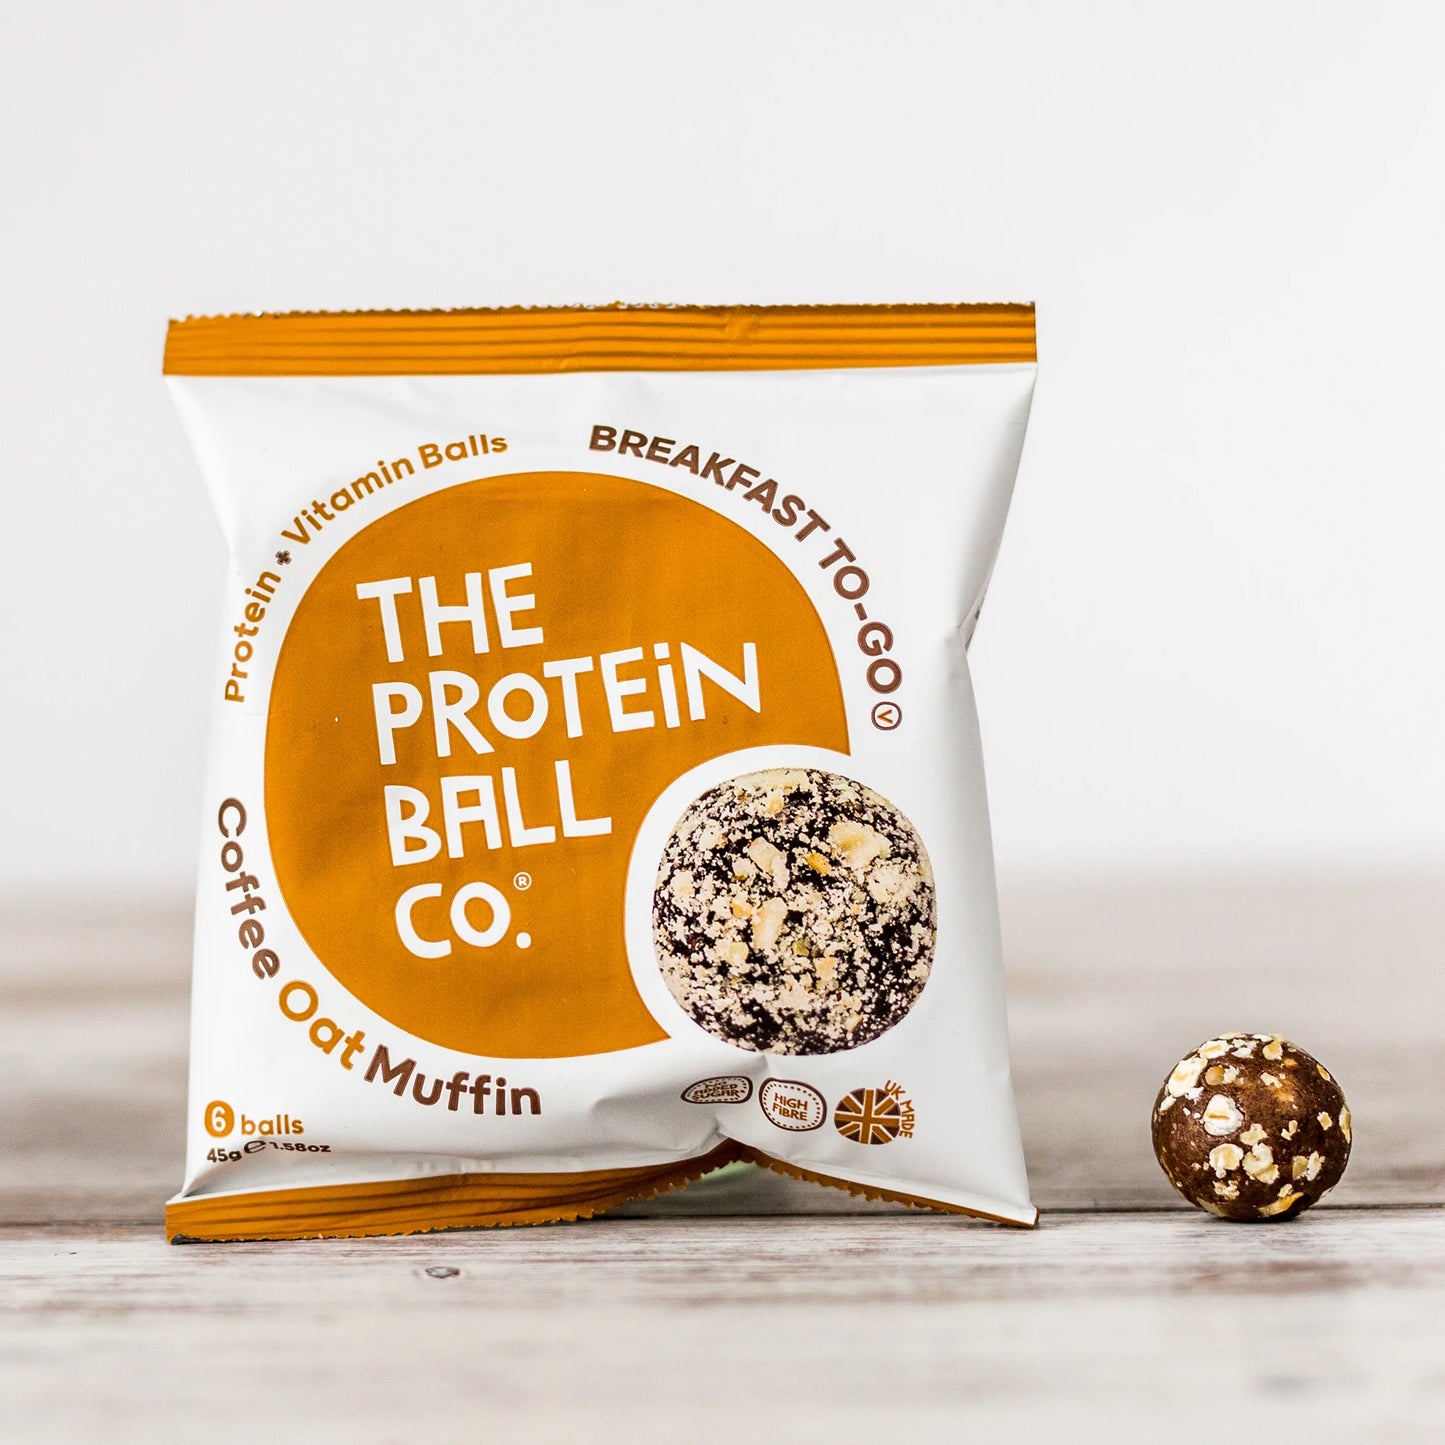 Coffee Oat Muffin Protein Balls (10 bags)